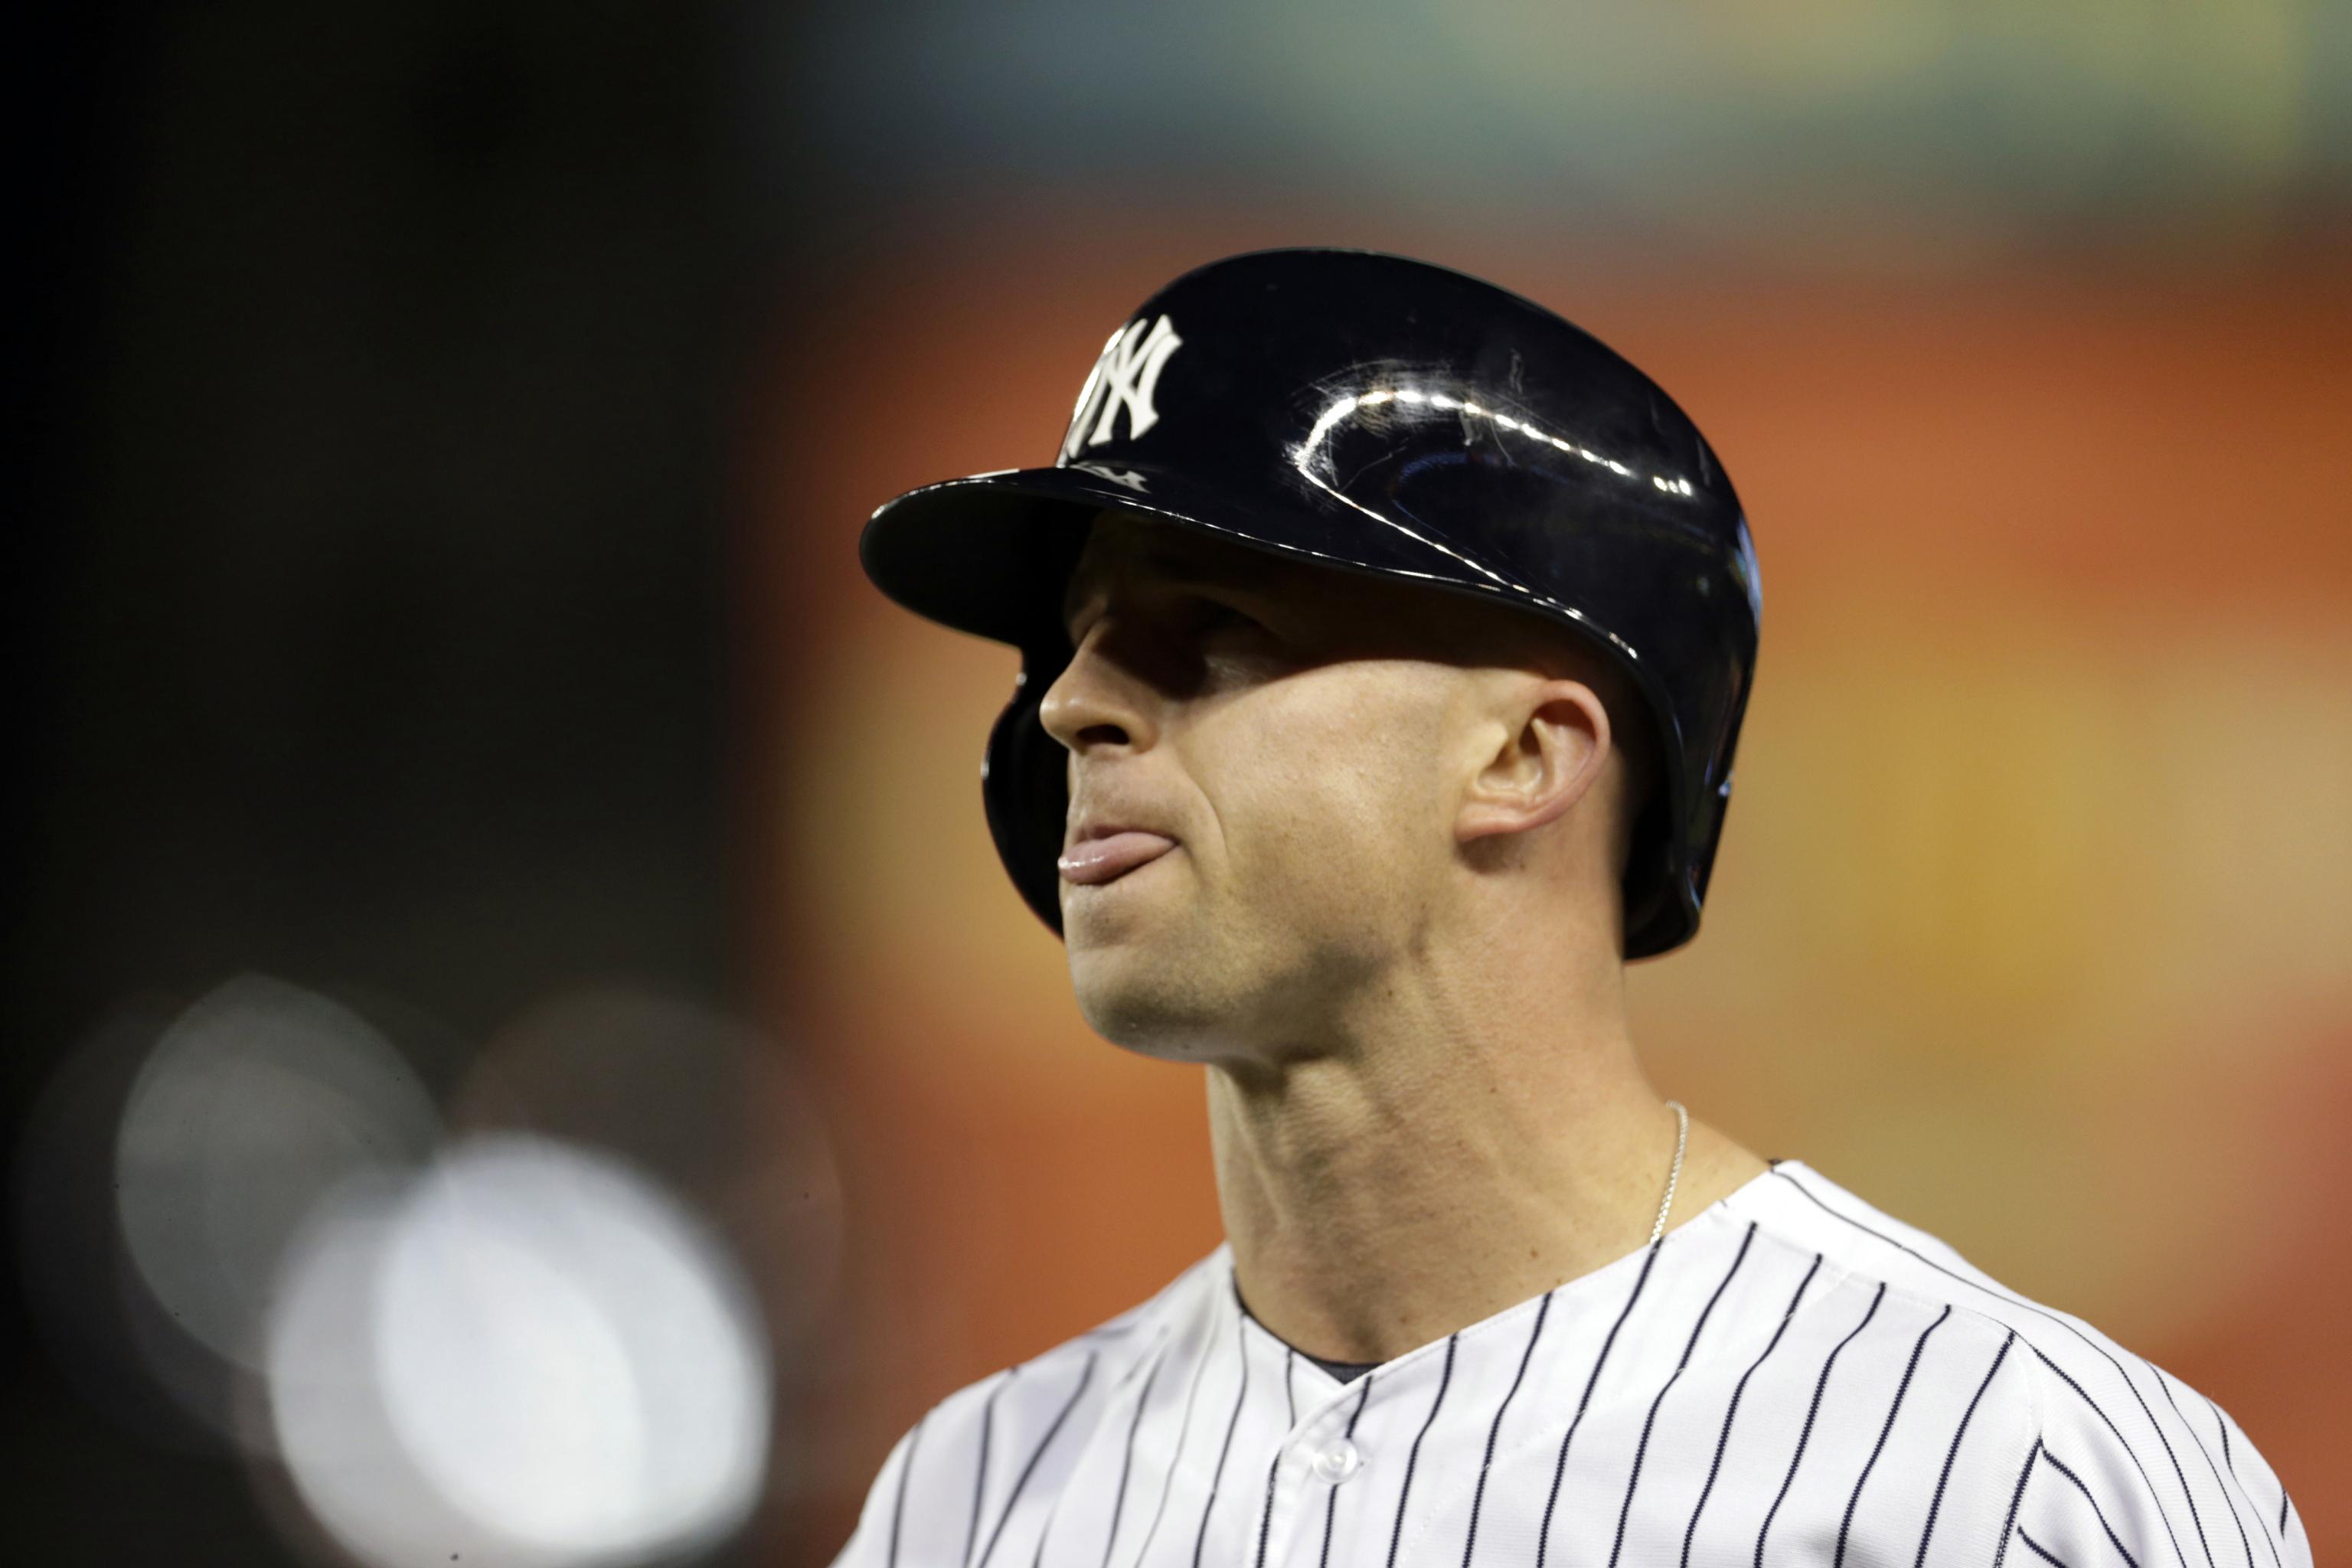 Examining 11 possible trades for the Yankees' number 11, Brett